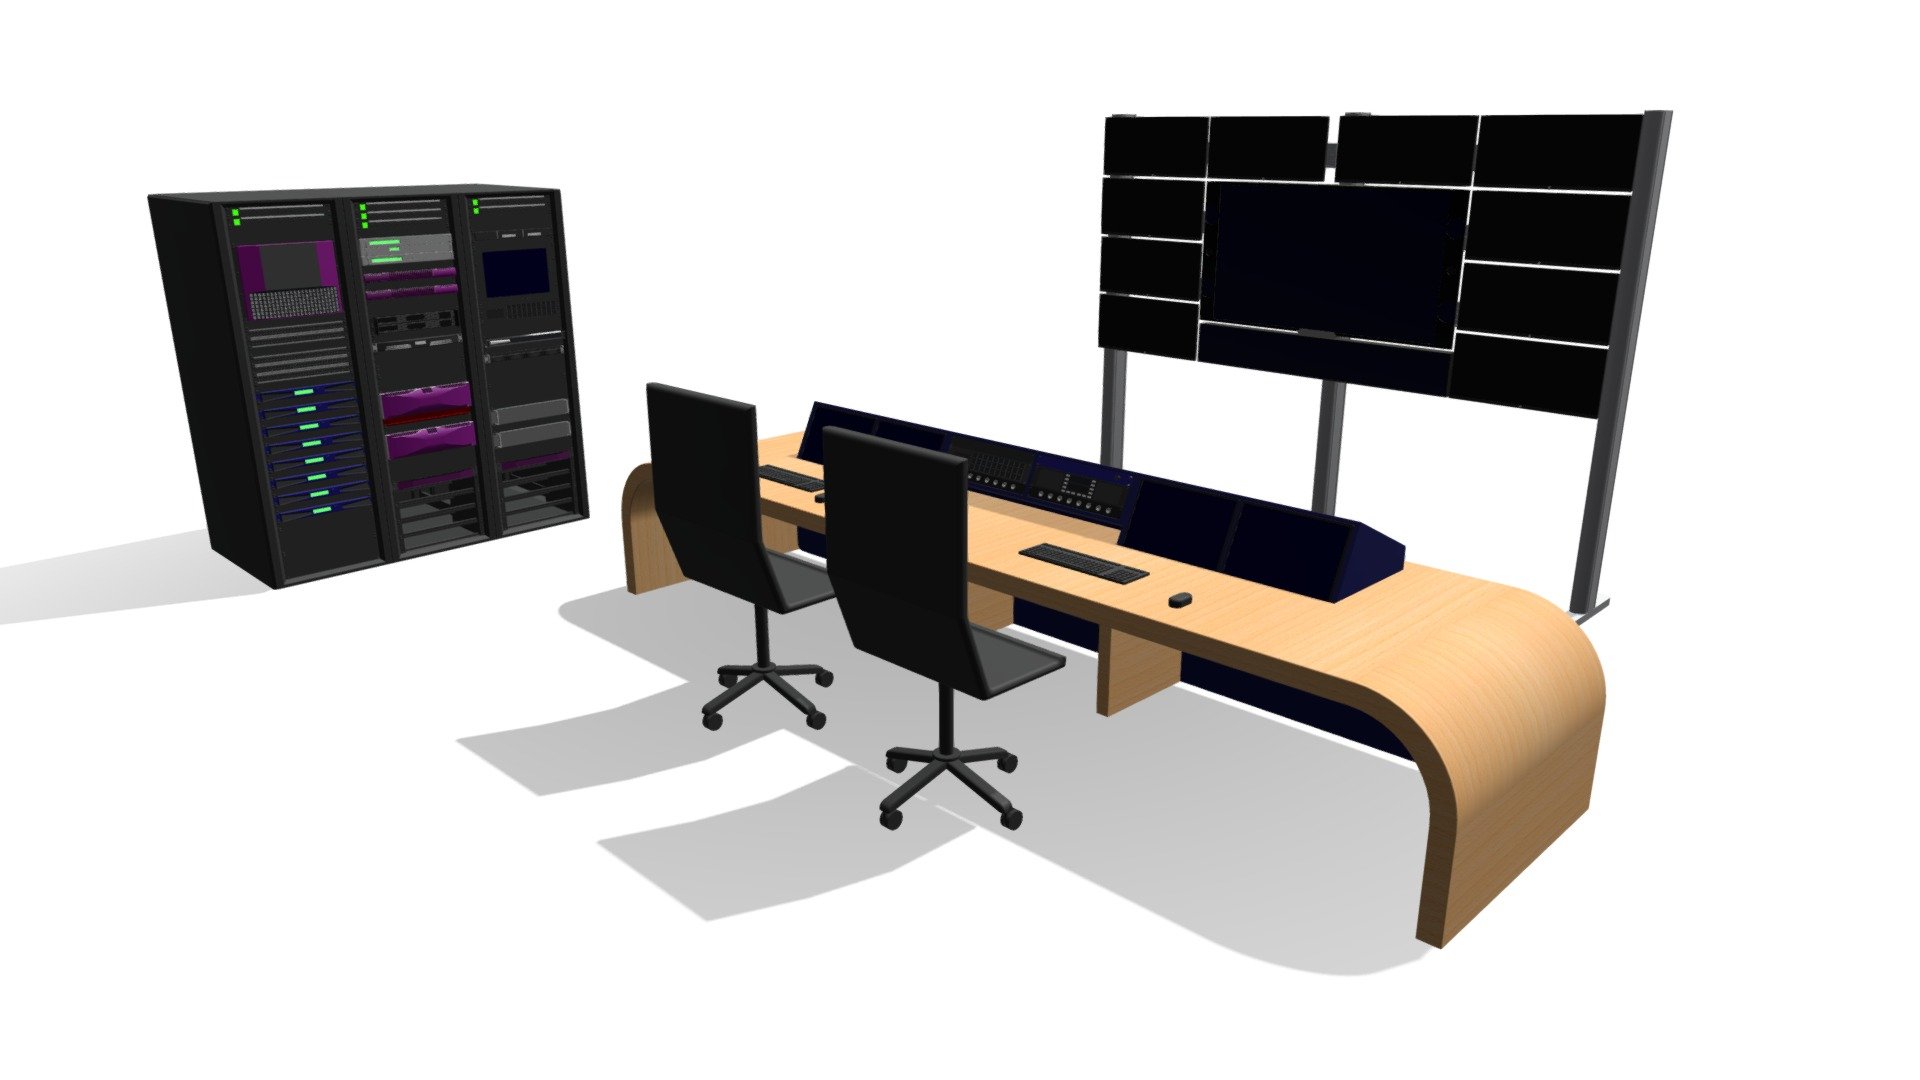 Satellite Monitor &amp; Recording System
For control room environments
Modelled to scale - Satellite Monitor & Recording System - 3D model by cavicom (@ASI) 3d model